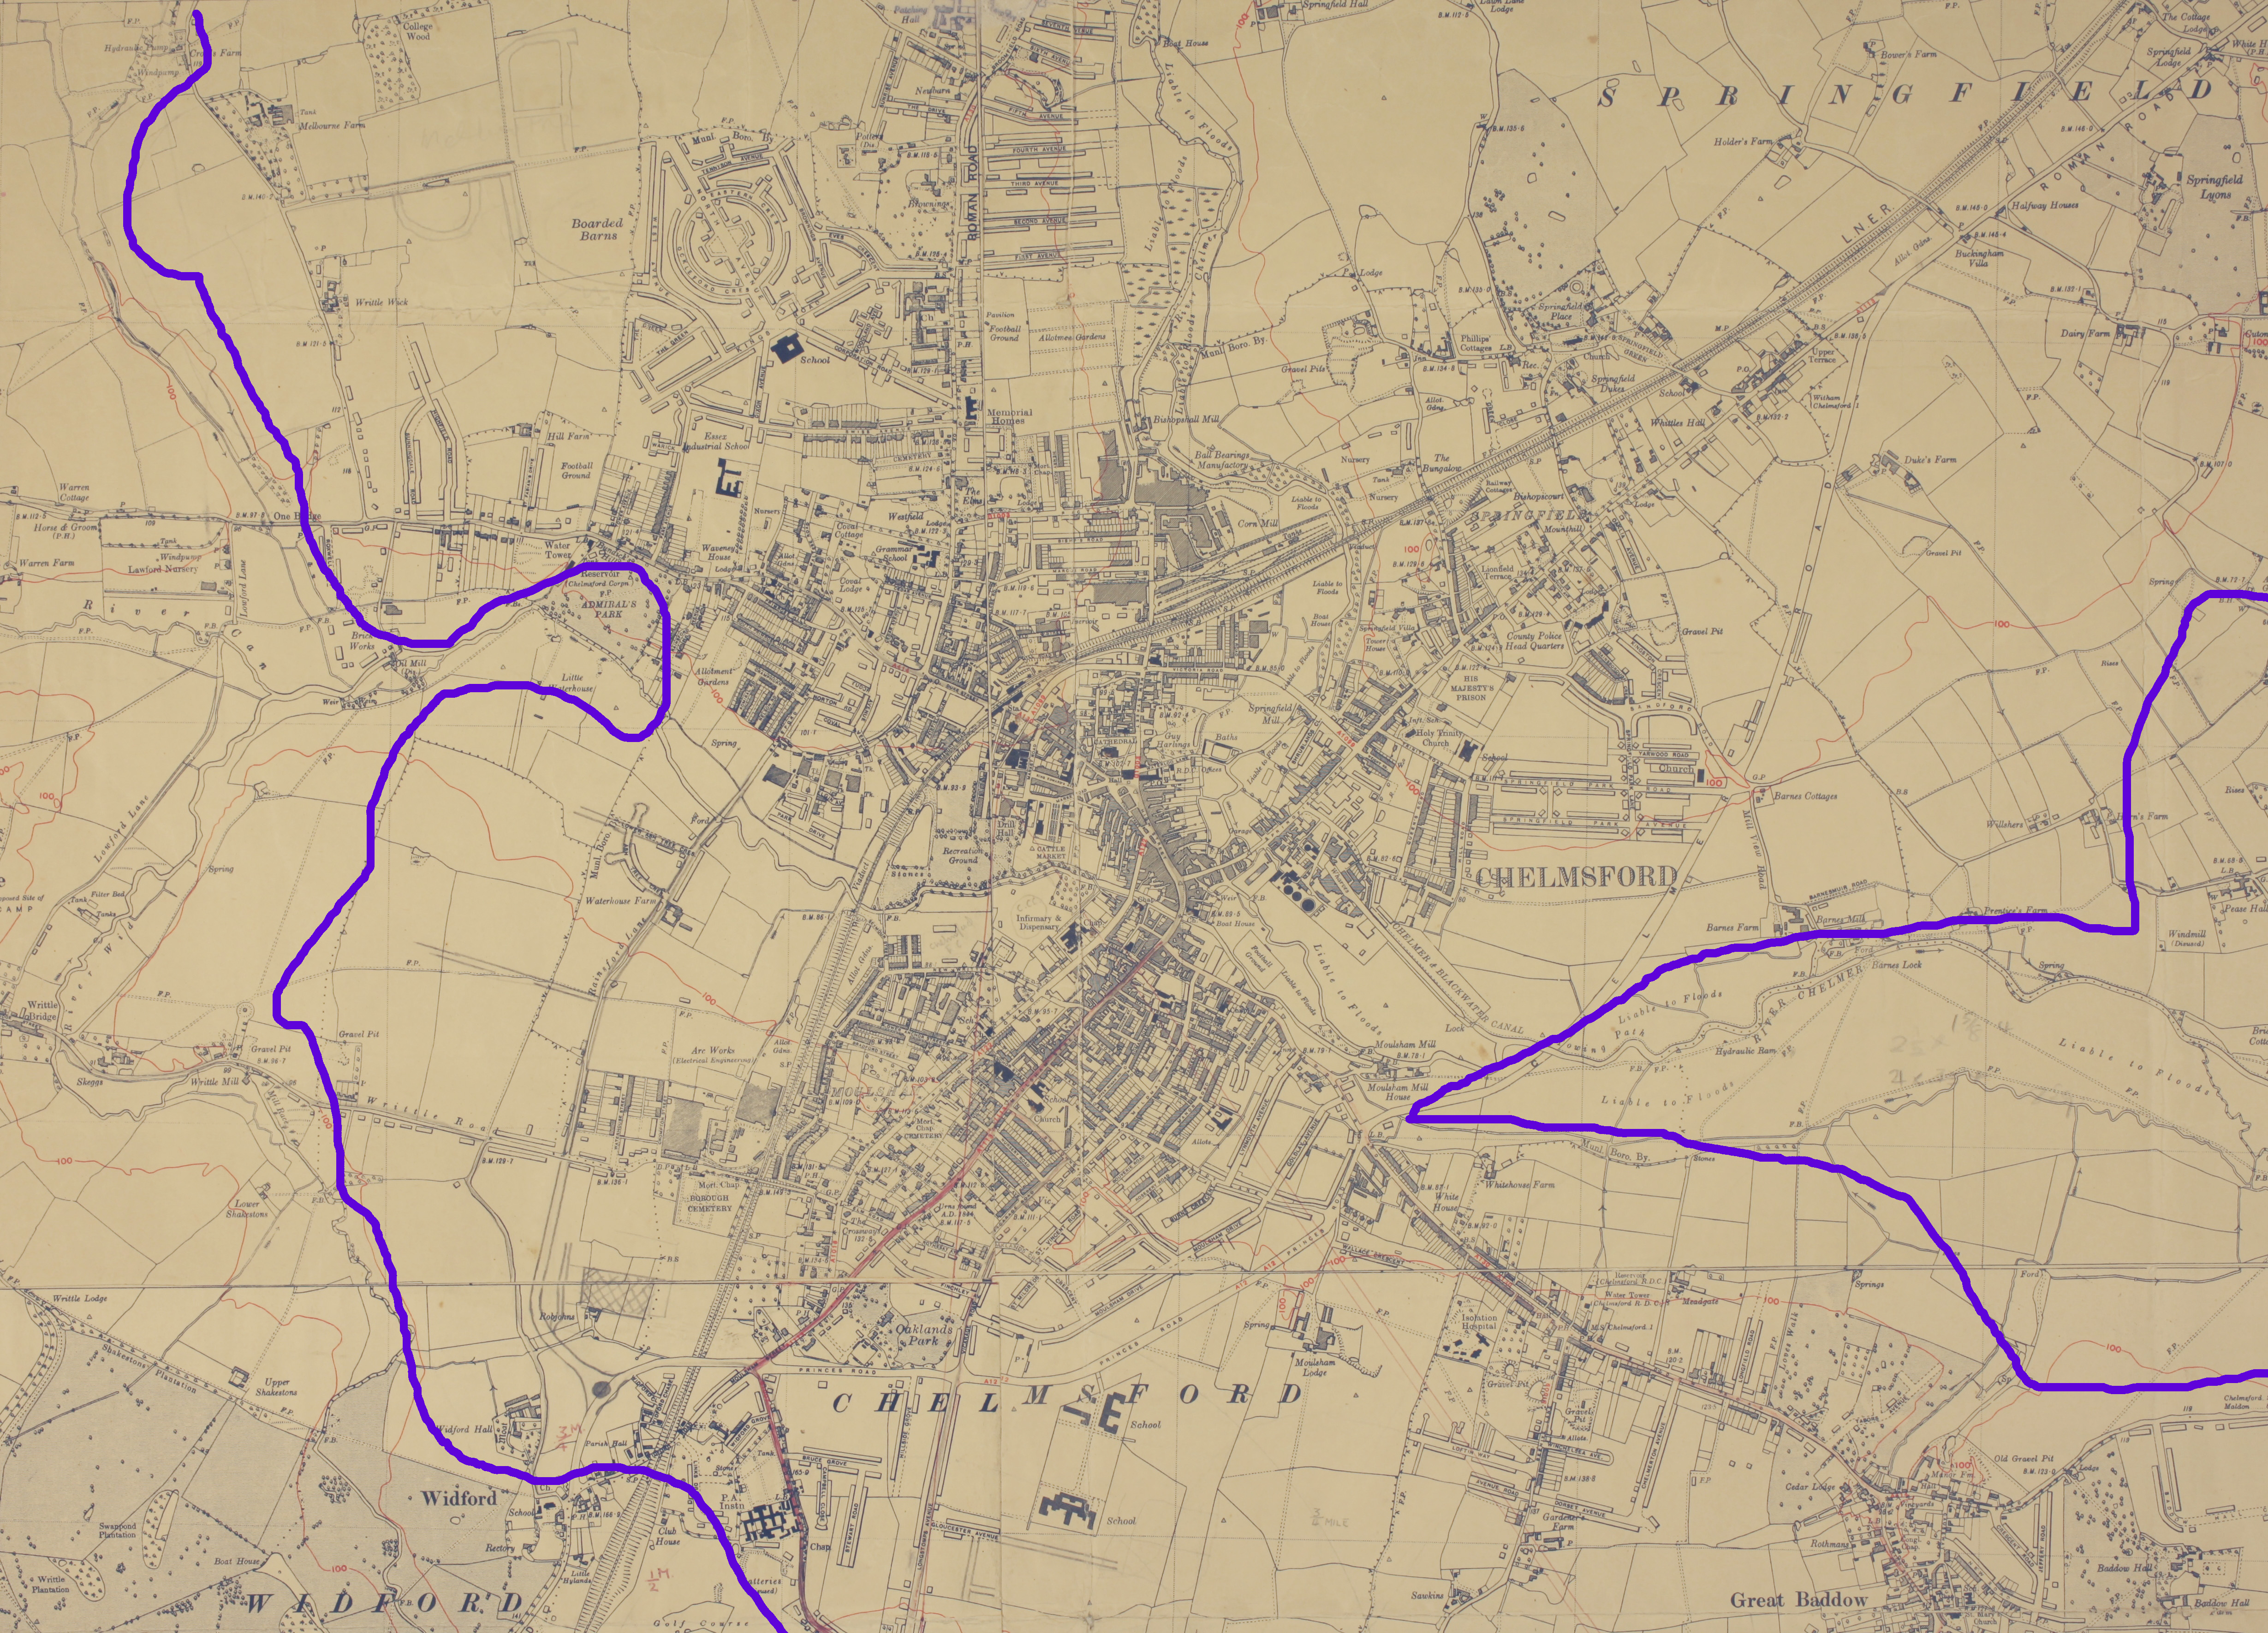 Ordnance Survey 6":1 mile map of Chelmsford, 1919 with 1938 revisions